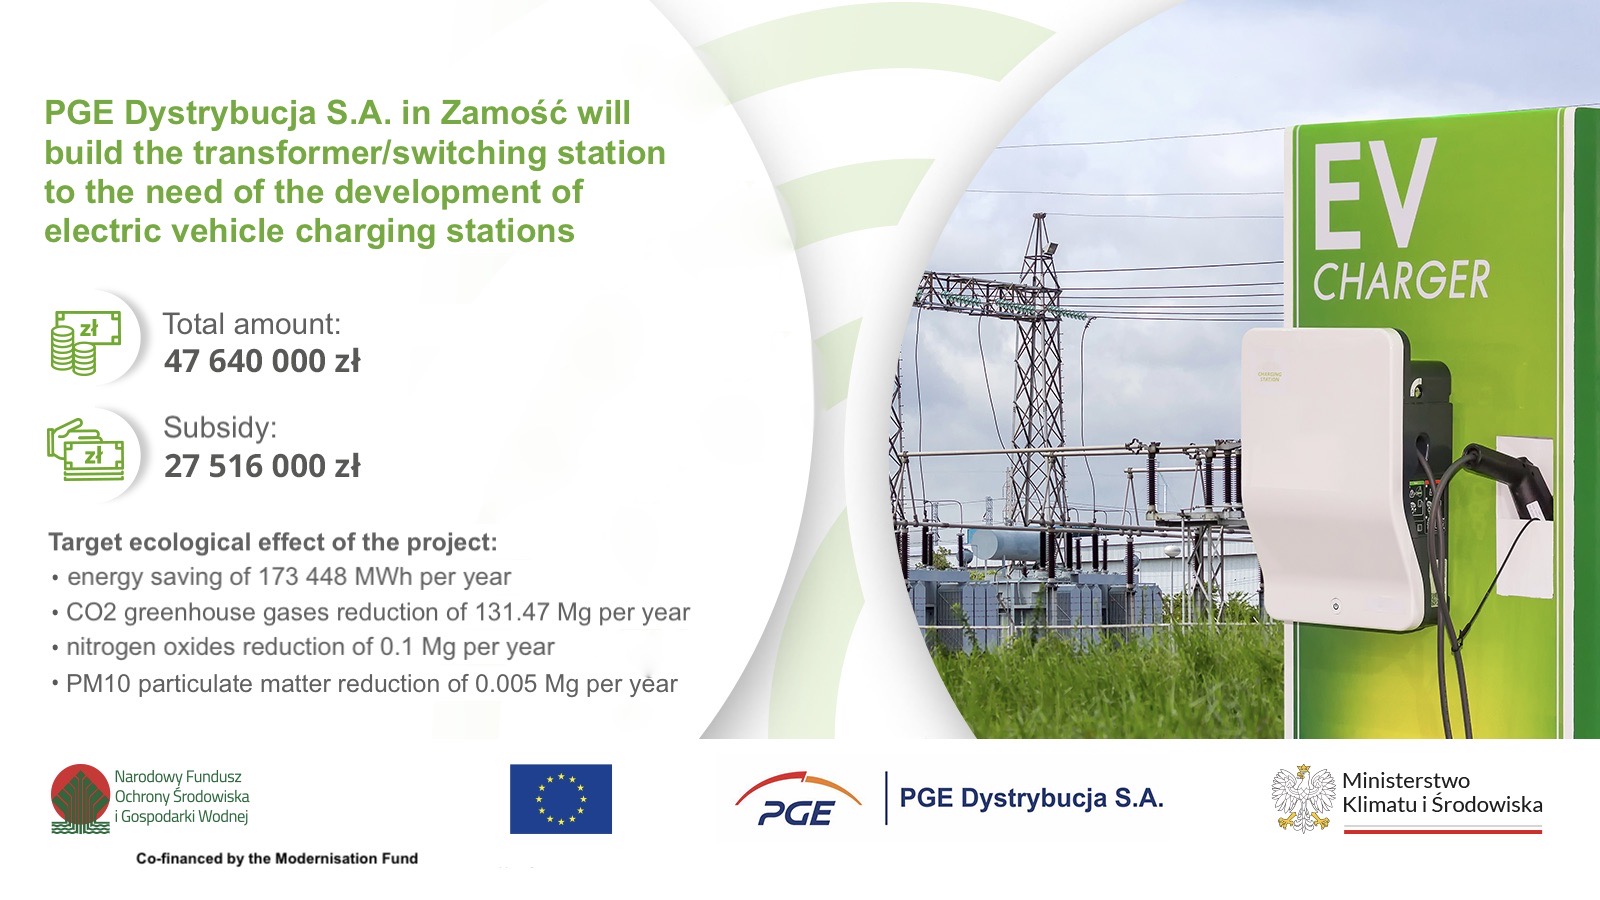 PGE Dystrybucja, a PGE Group company, will receive a grant of more than PLN 27.5 million from the National Fund for Environmental Protection and Water Management (NFOŚiGW) under the Modernisation Fund.